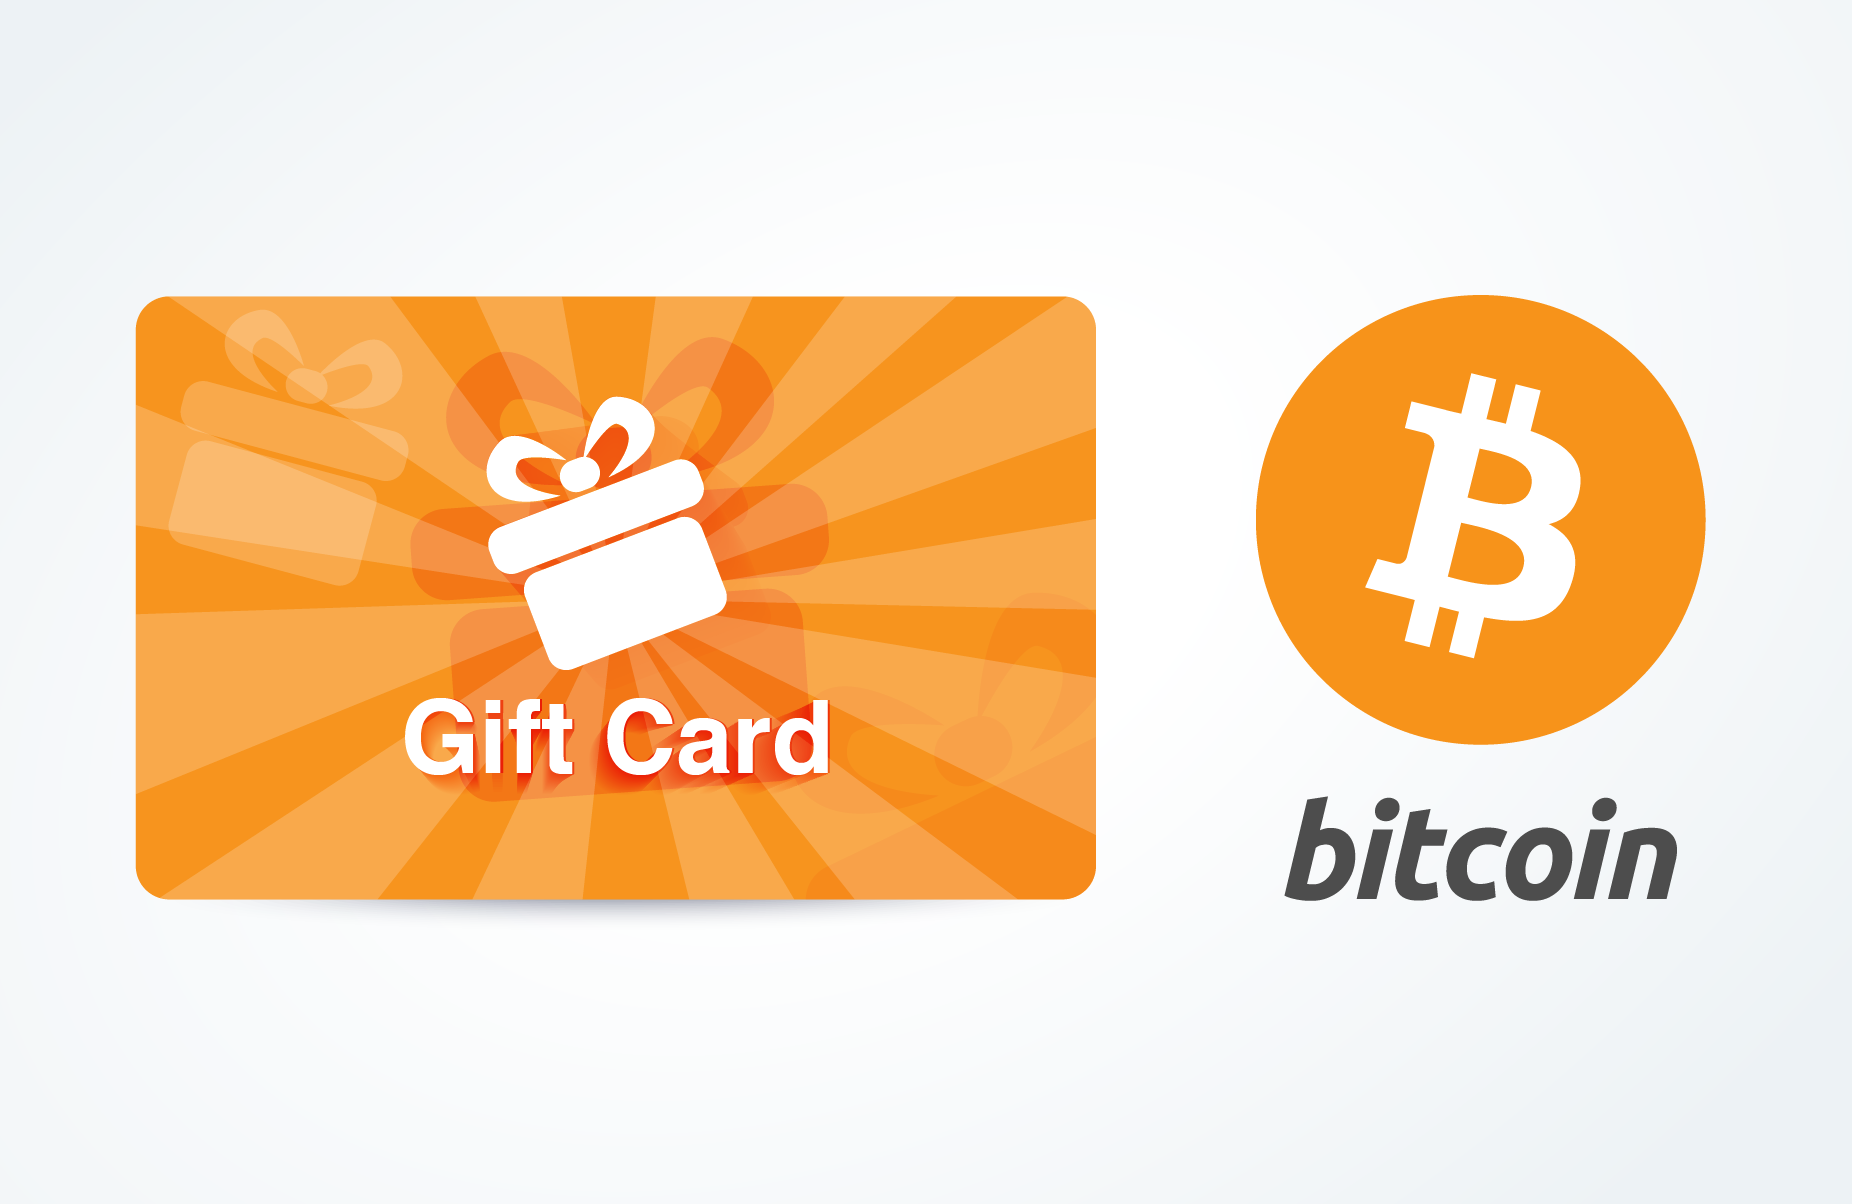 Buy gift cards with bitcoin cash janus coin crypto